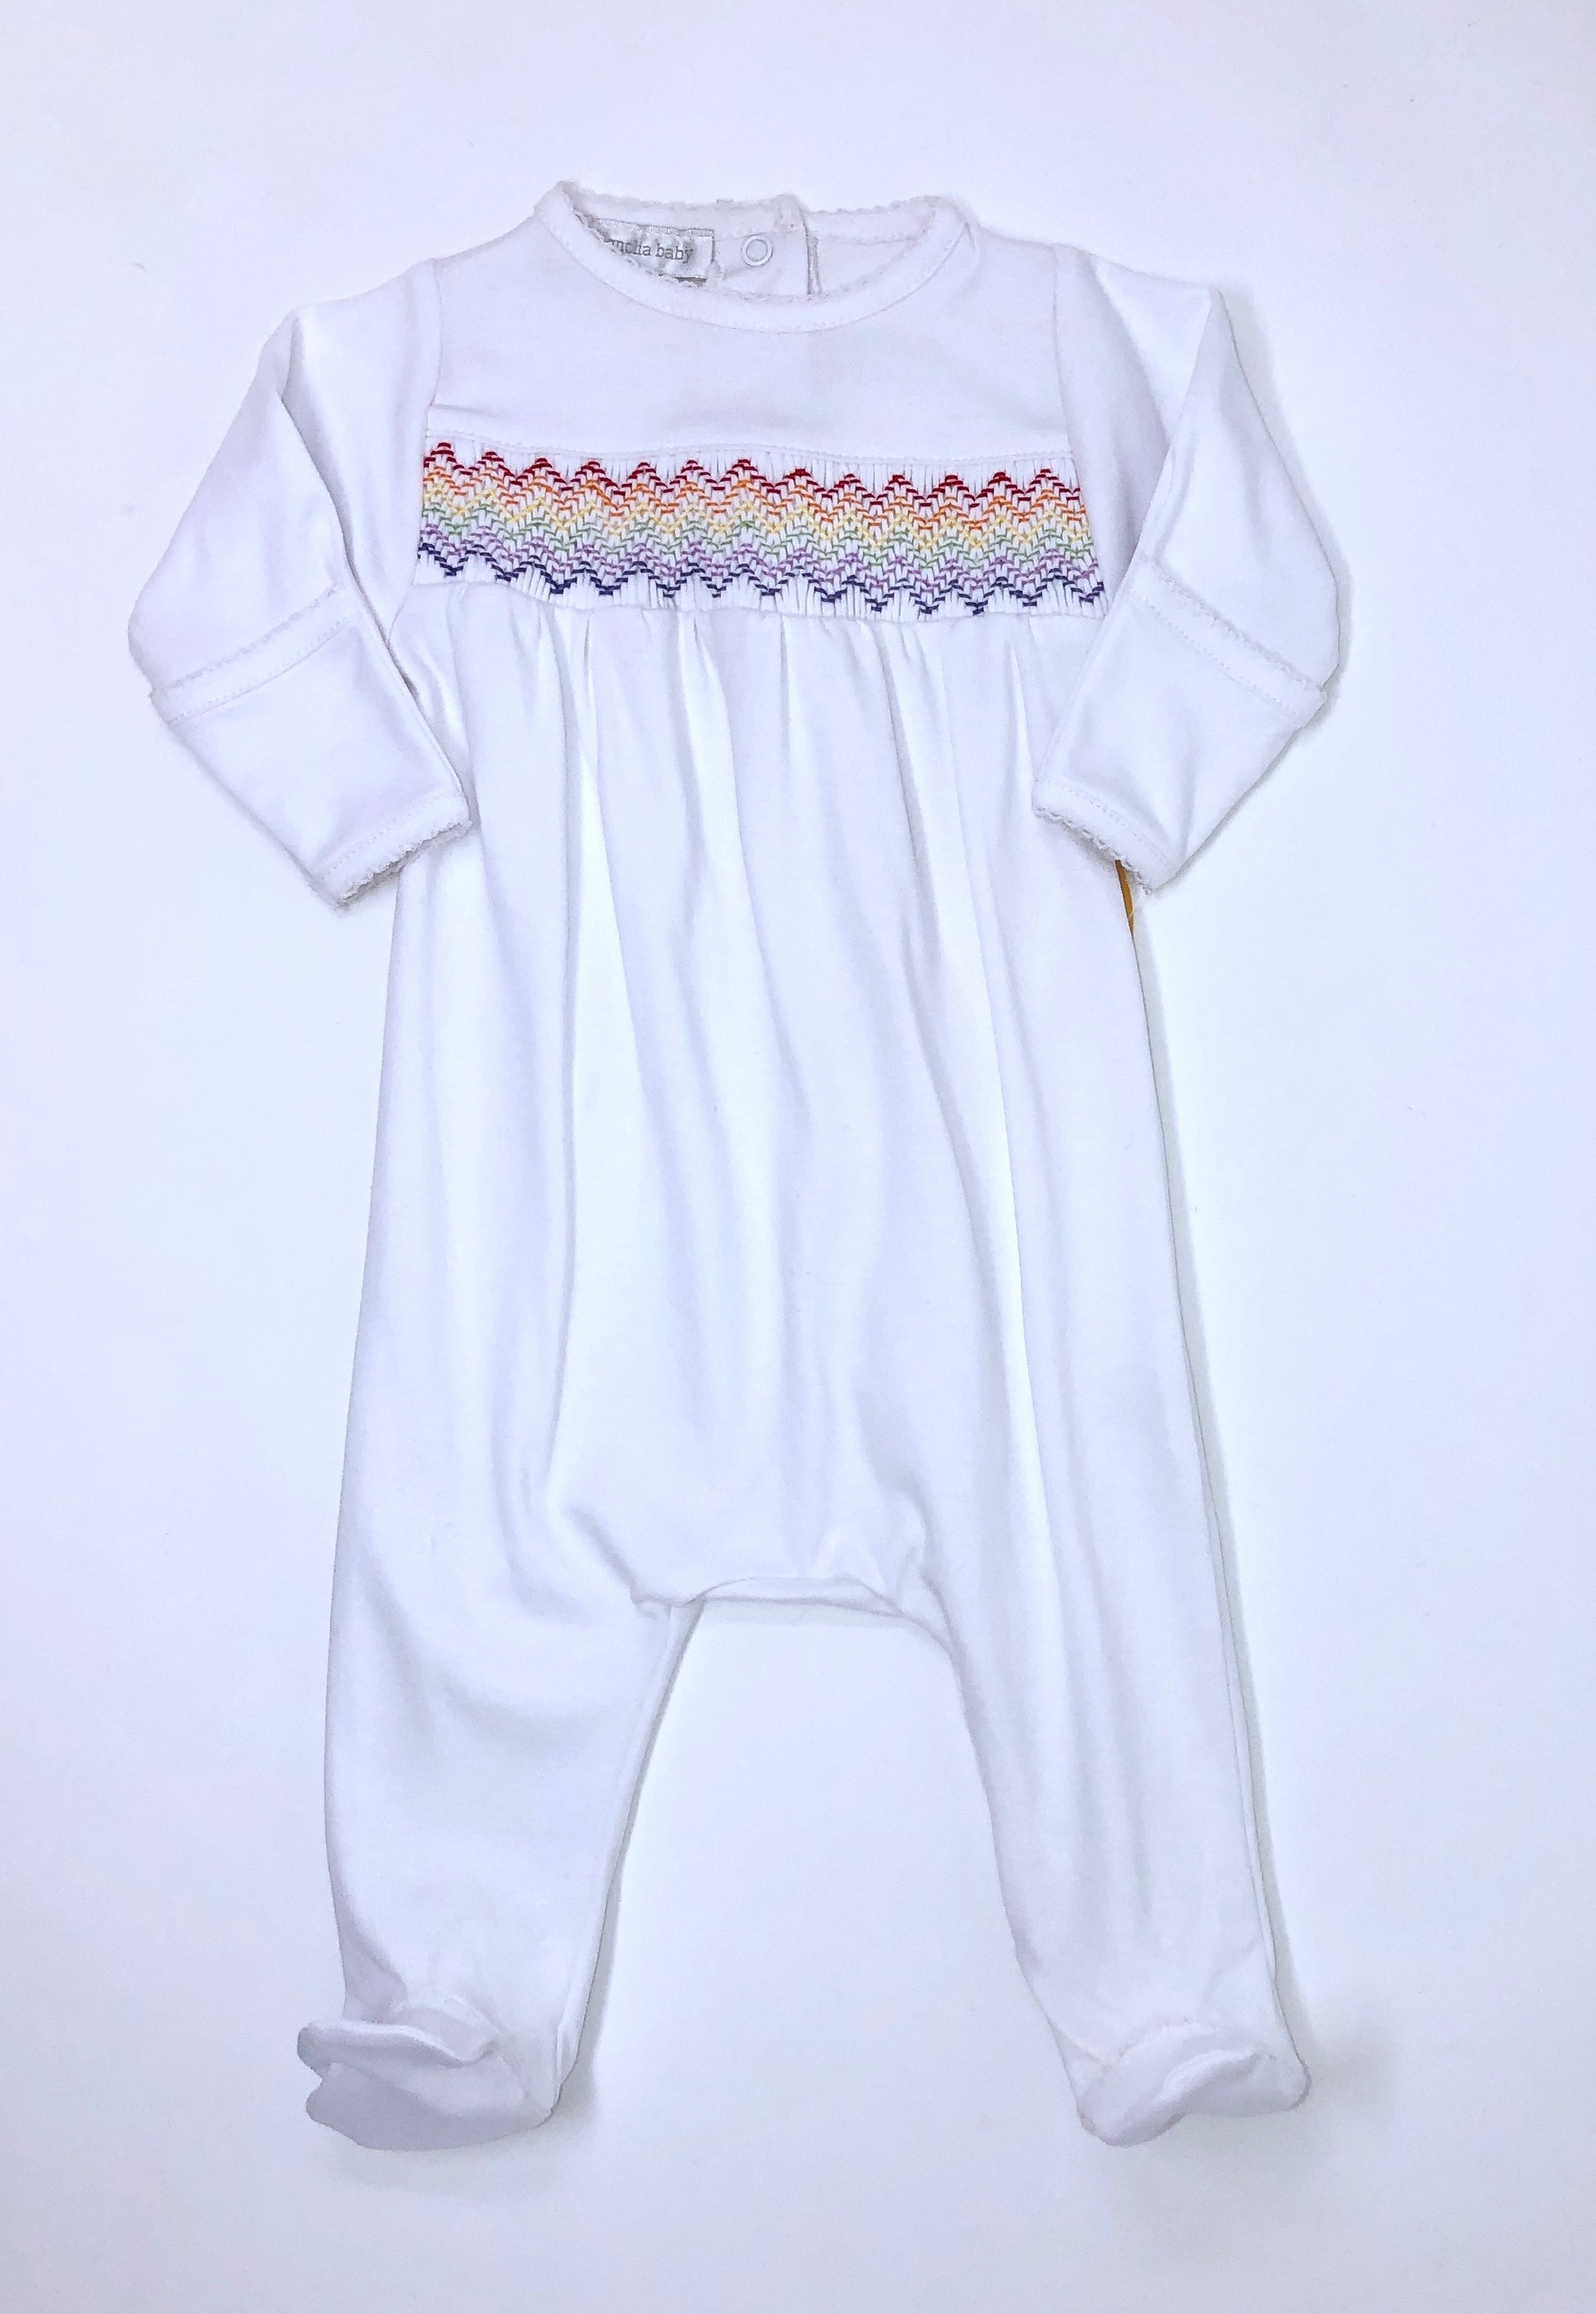 Rainbow Baby Smocked Footie Gifts Magnolia Baby   